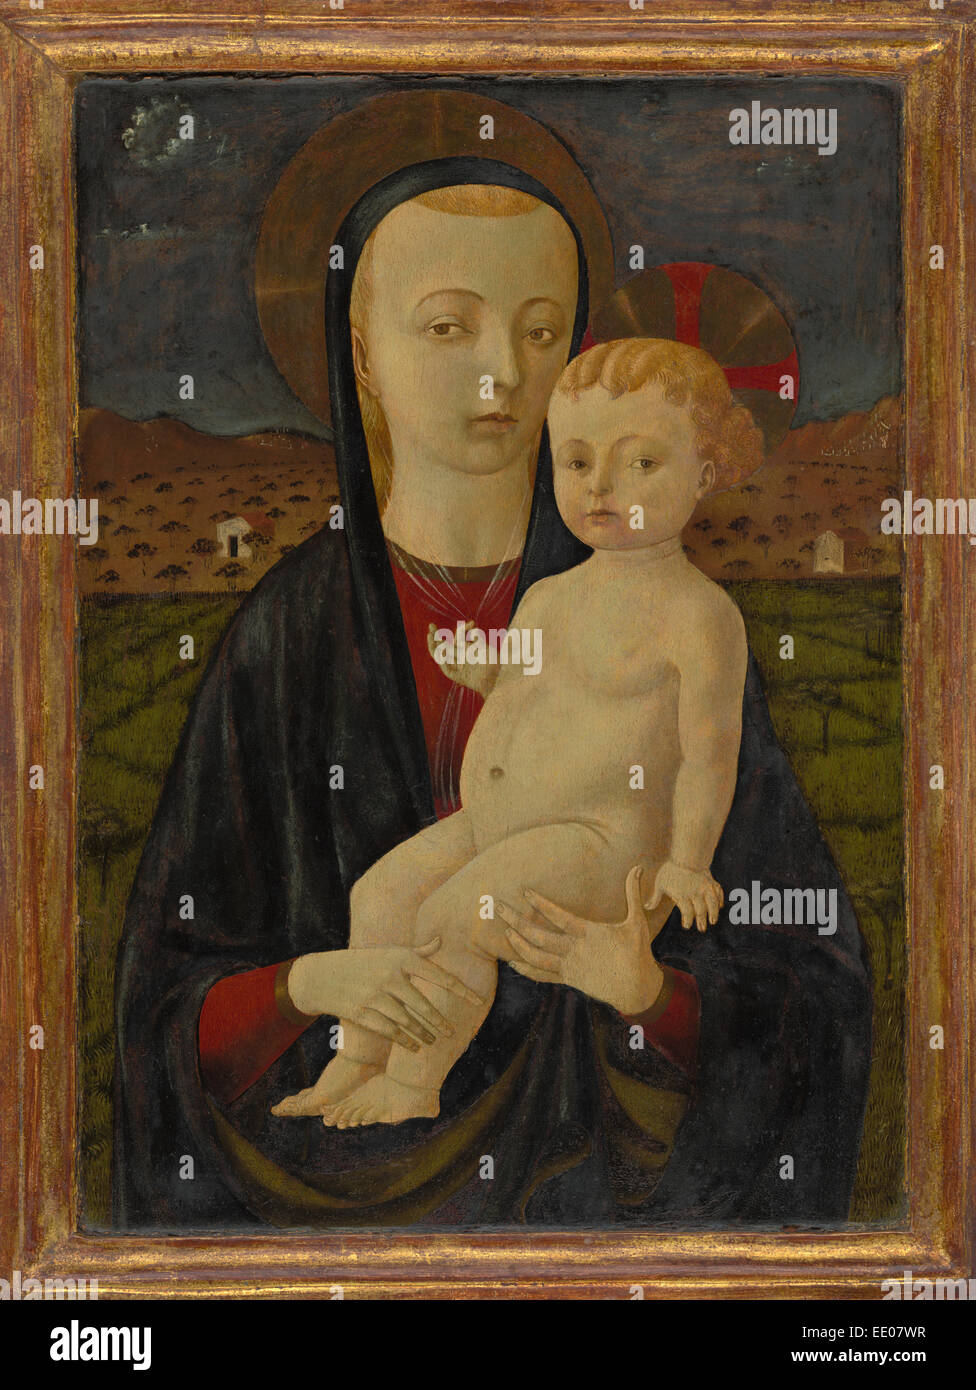 Madonna and Child; Workshop of Paolo Uccello, Italian, about 1397 - 1475; Italy, Europe; about 1470 - 1475; Tempera on panel Stock Photo